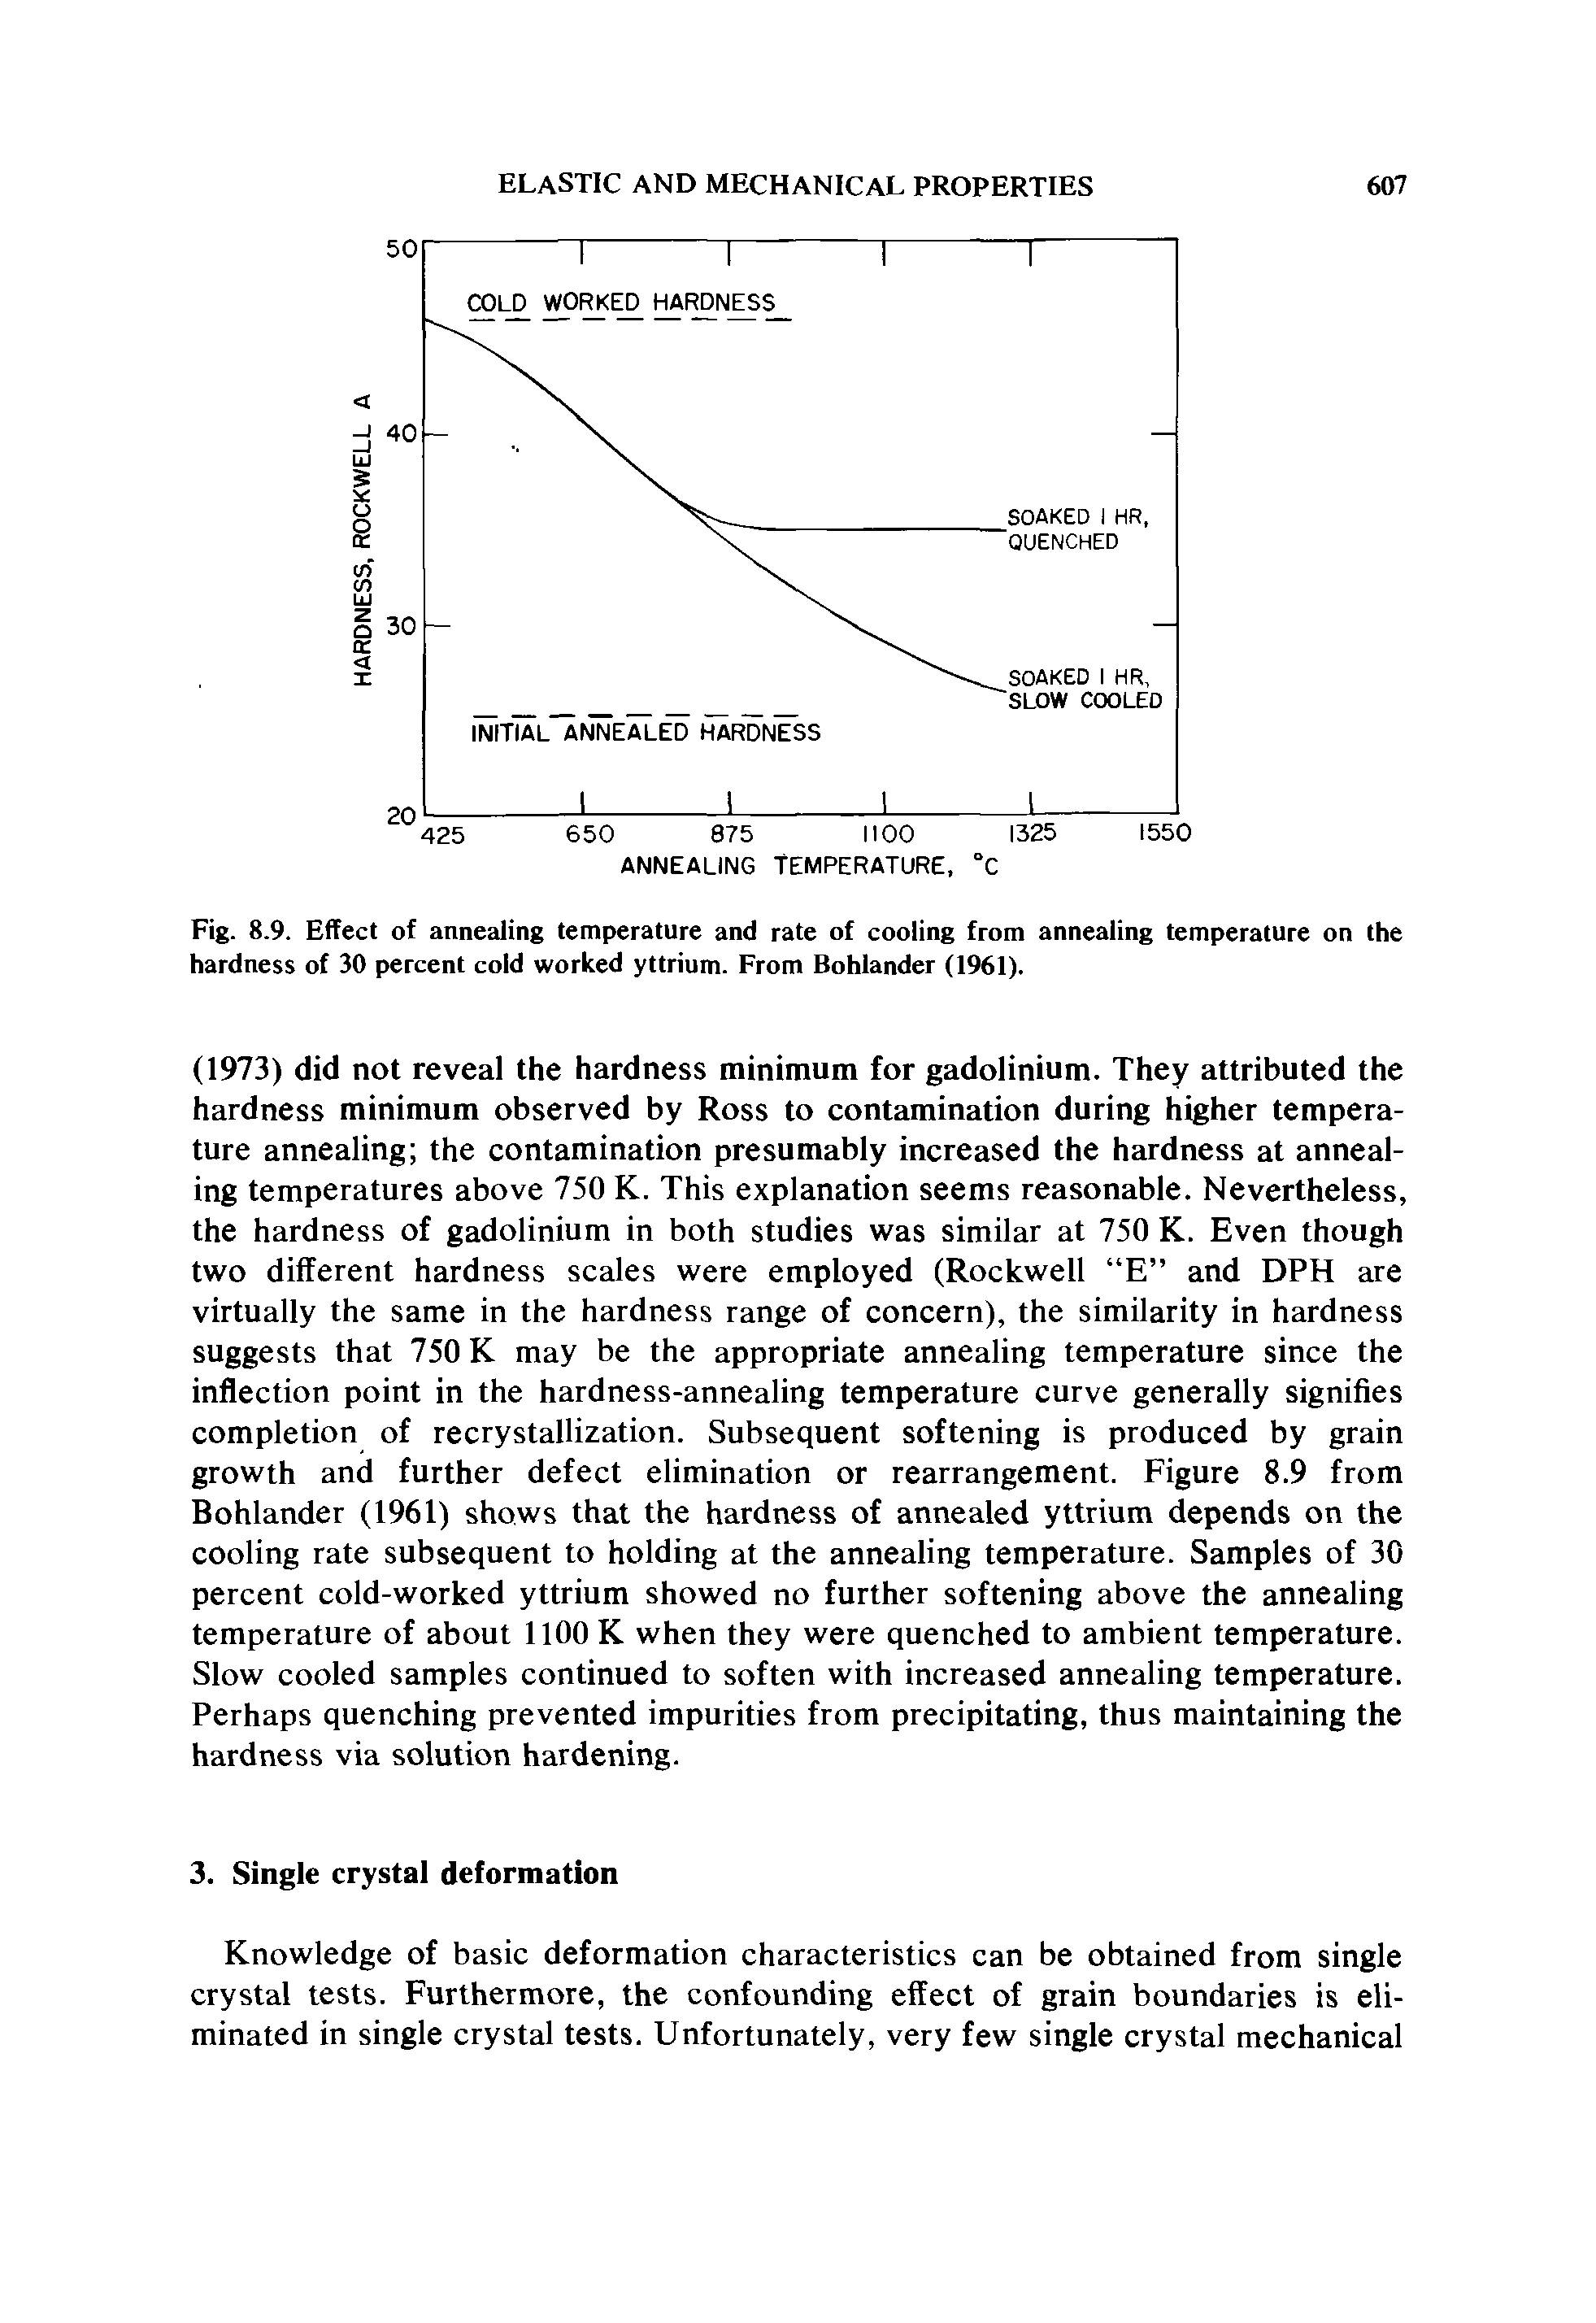 Fig. 8.9. Effect of annealing temperature and rate of cooling from annealing temperature on the hardness of 30 percent cold worked yttrium. From Bohlander (1961).